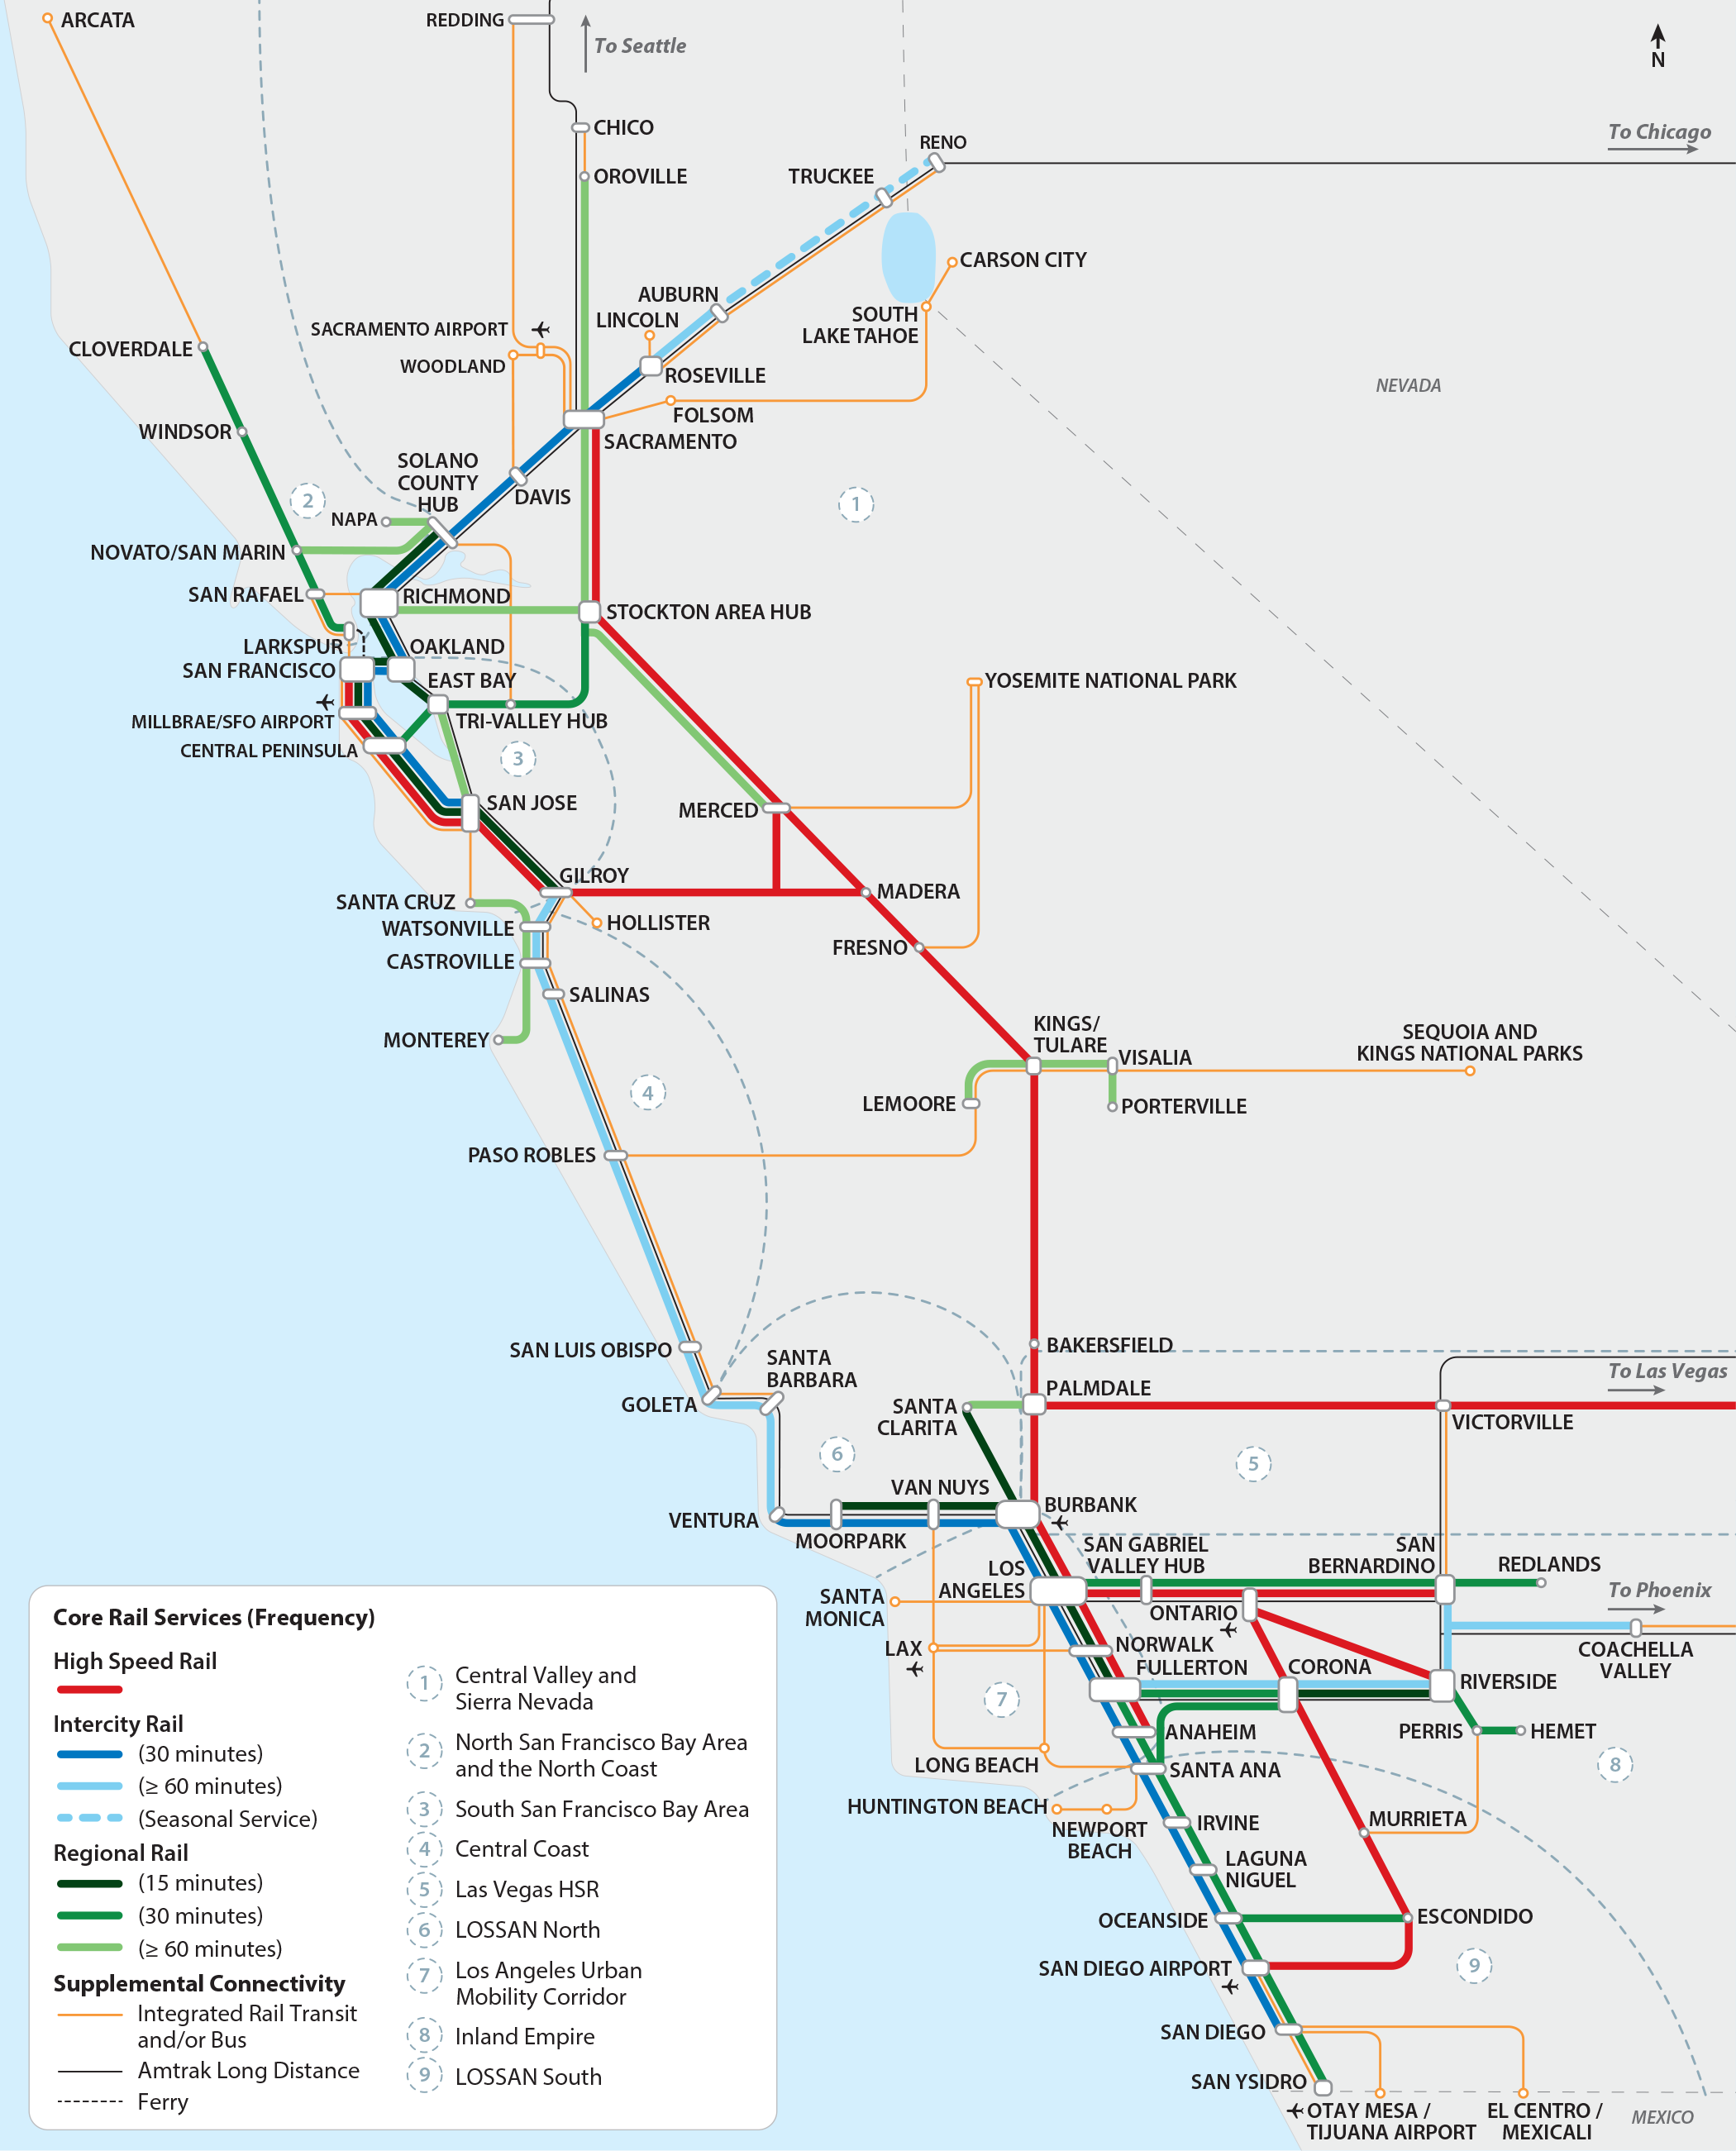 A map of California's proposed passenger rail network proposed in 2018.